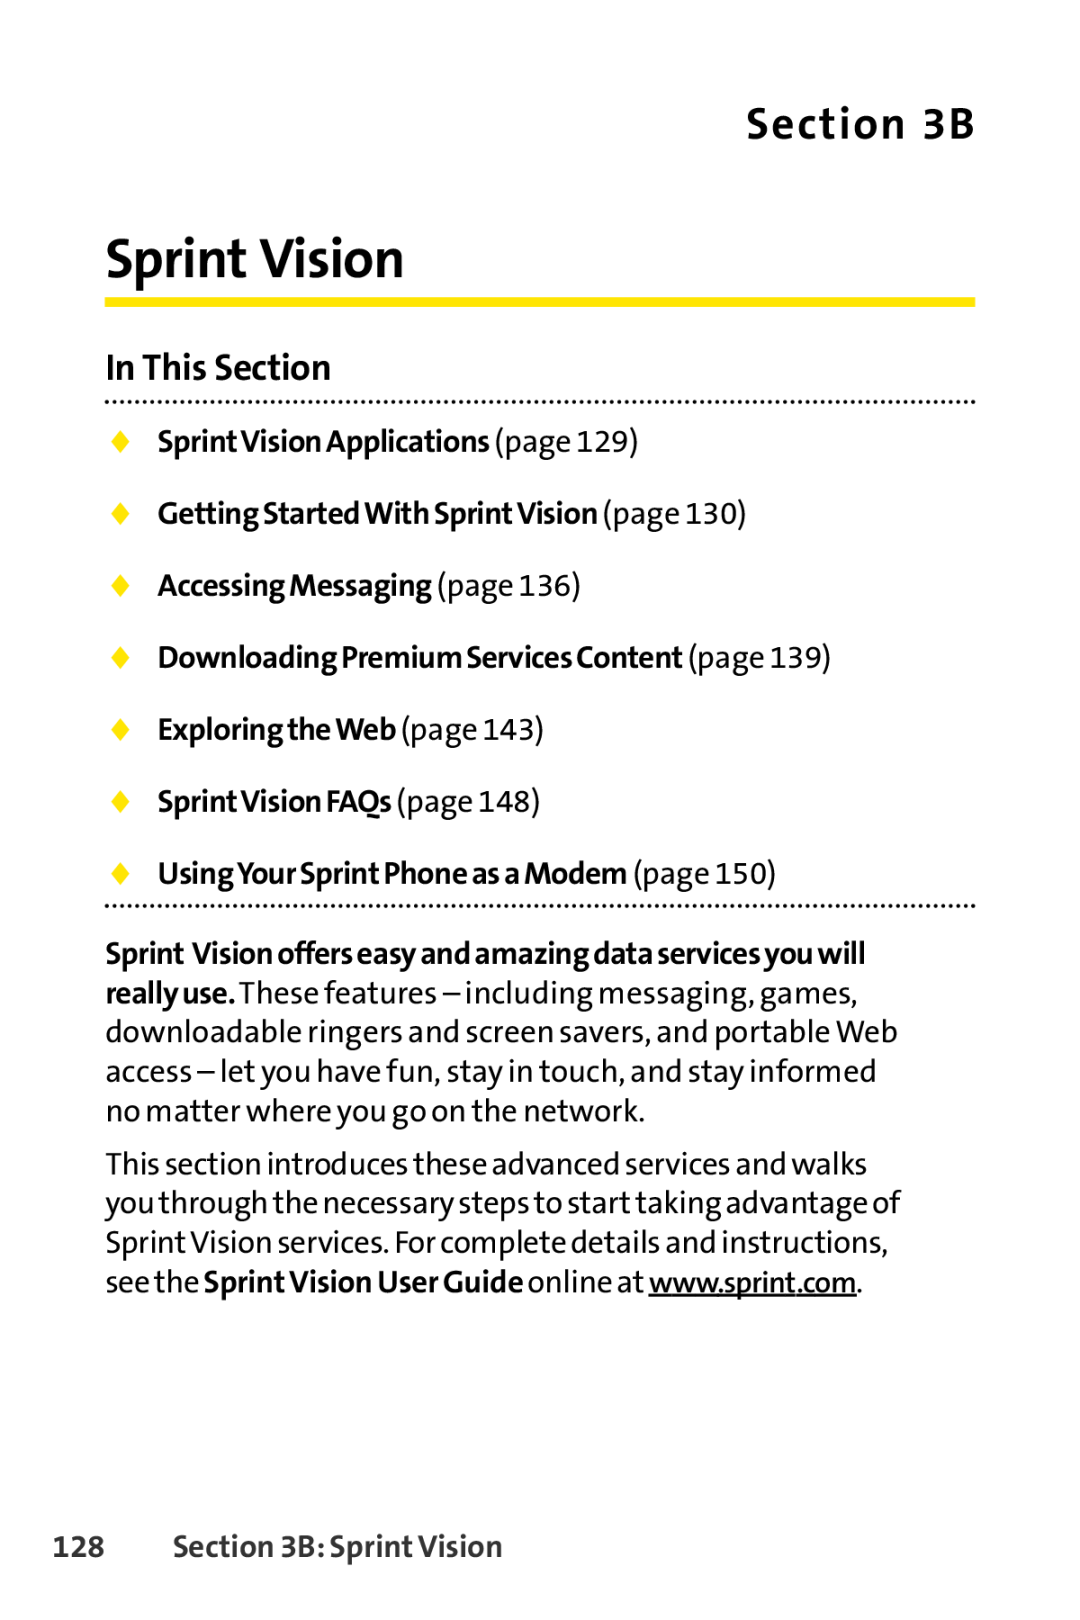 Sprint Nextel LX160 manual Sprint Vision, B,  SprintVisionApplications page  GettingStartedWithSprintVision page 